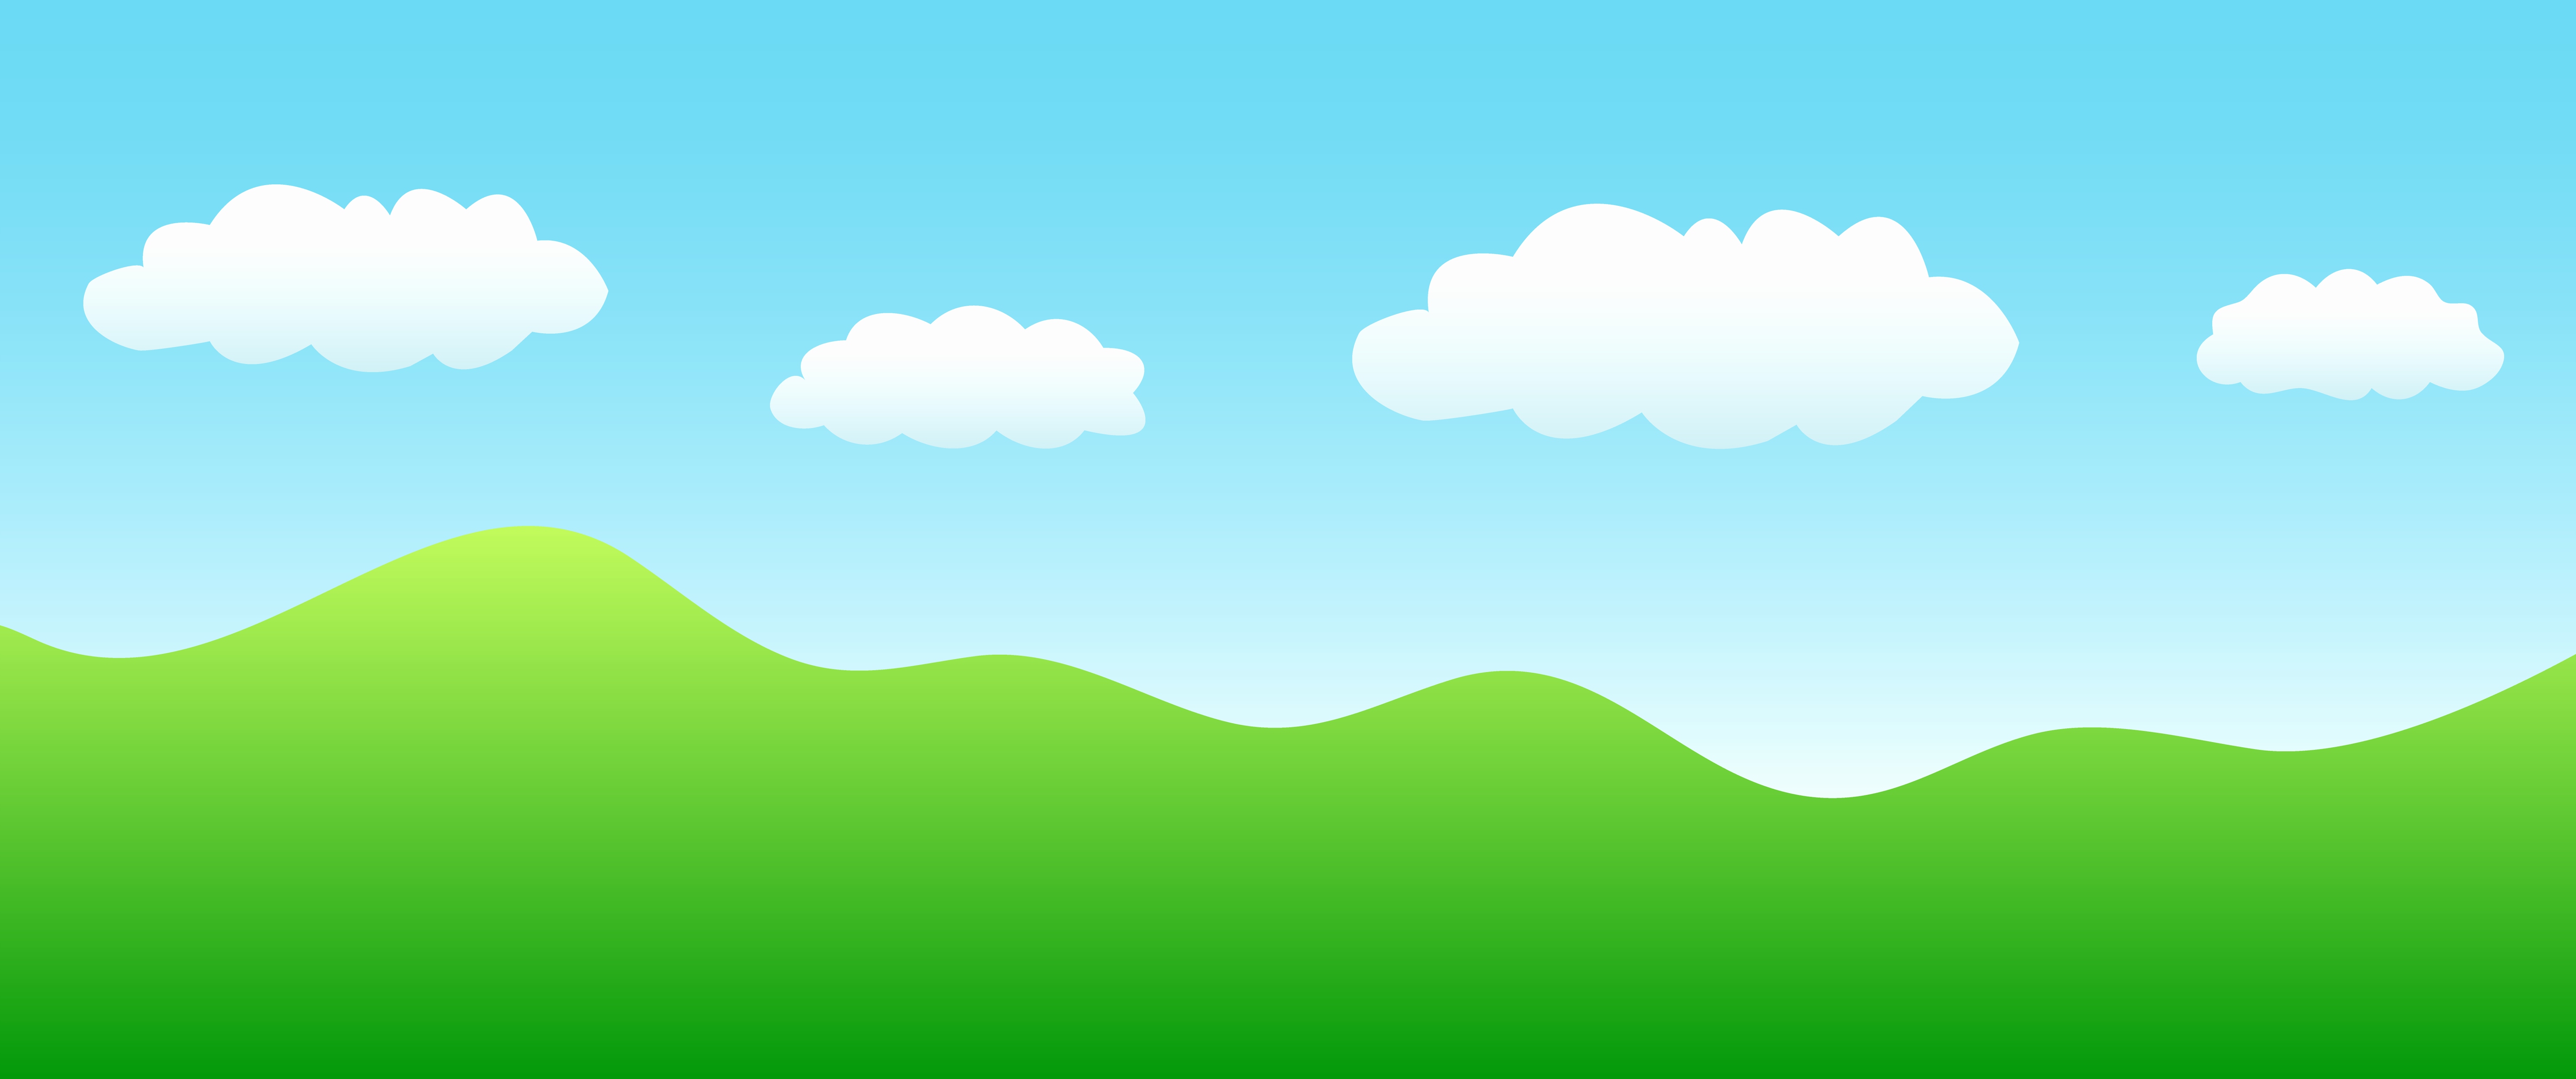 Clip Art Of Sky And Clouds Picture 50 Blue Landscaping Fresh Clipart ...